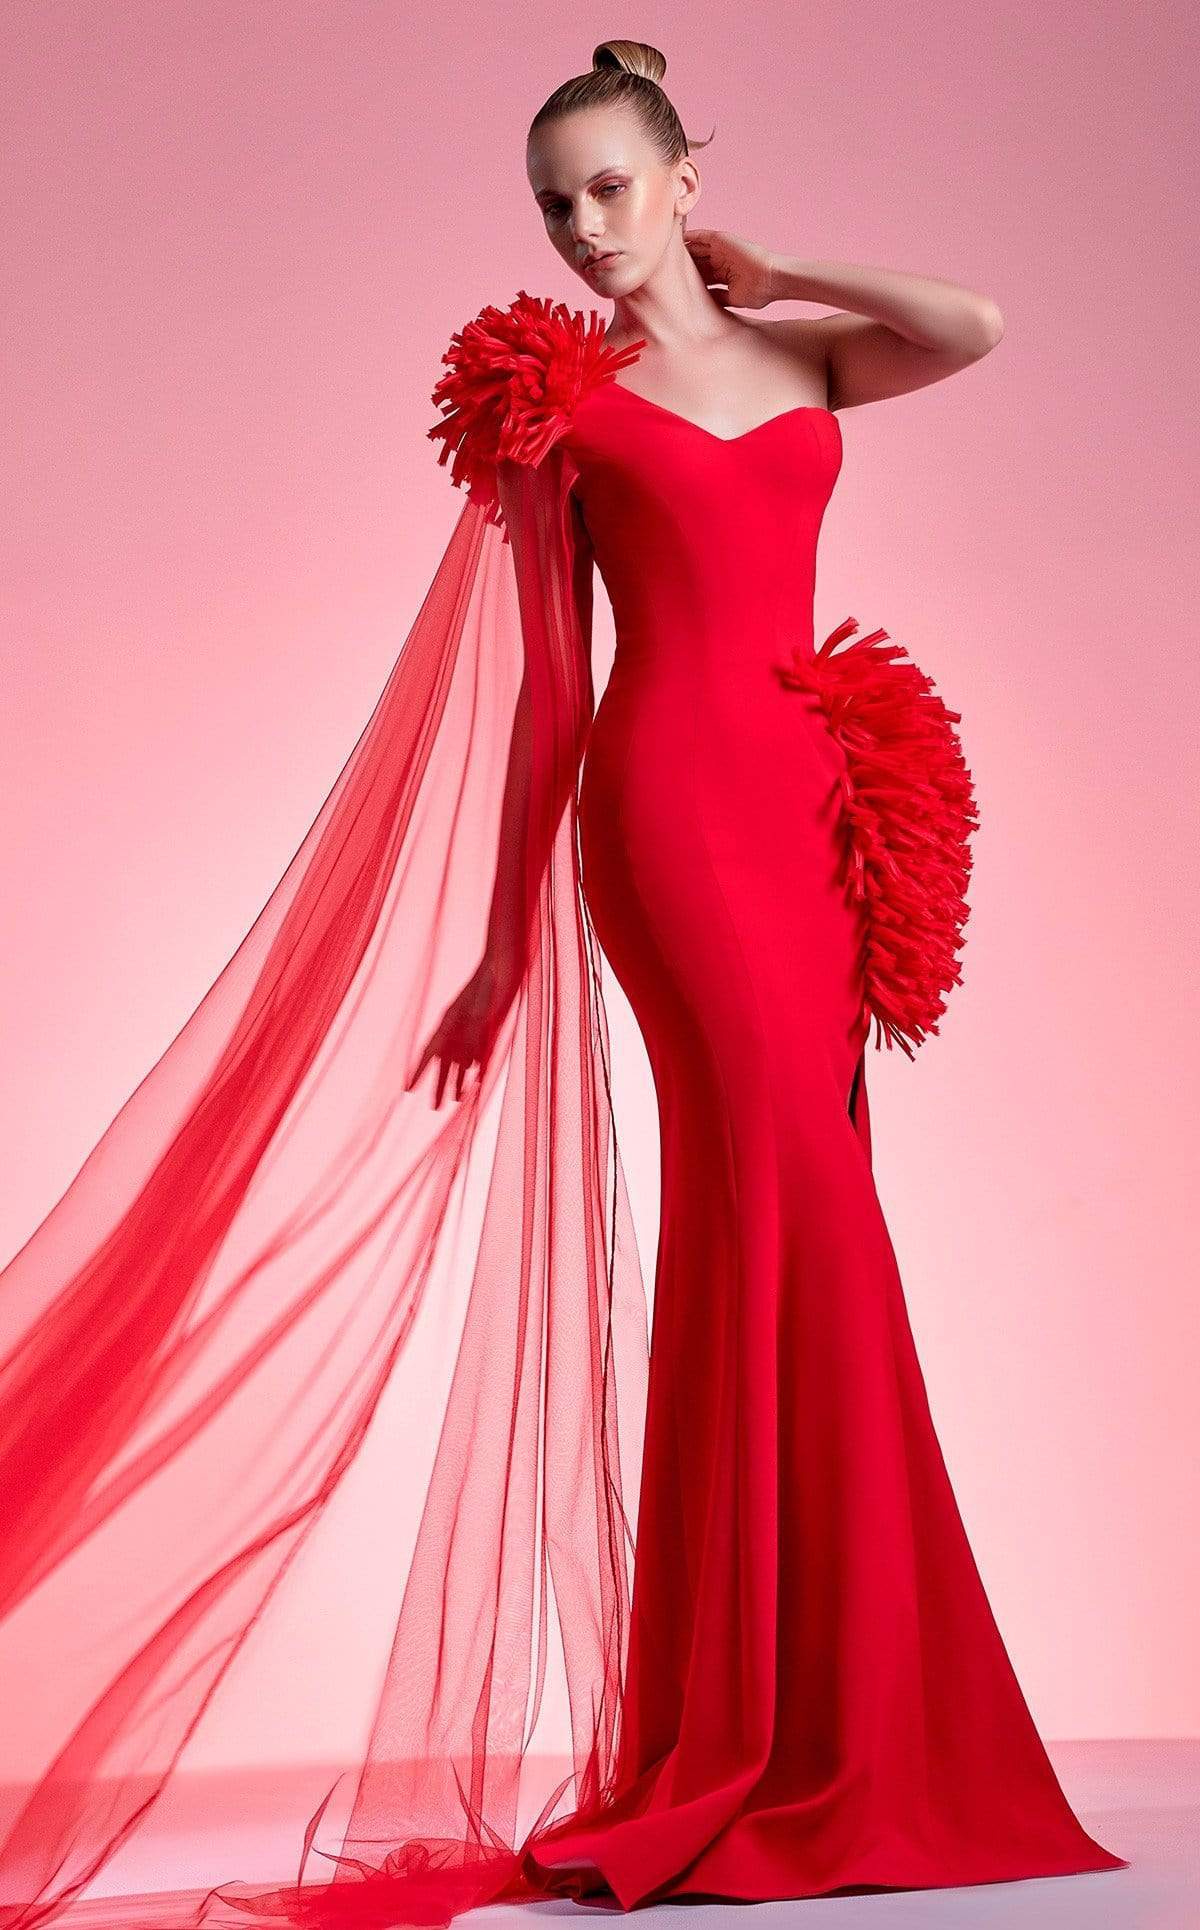 MNM Couture - G1211 Asymmetrical Fringed High Slit Mermaid Gown
